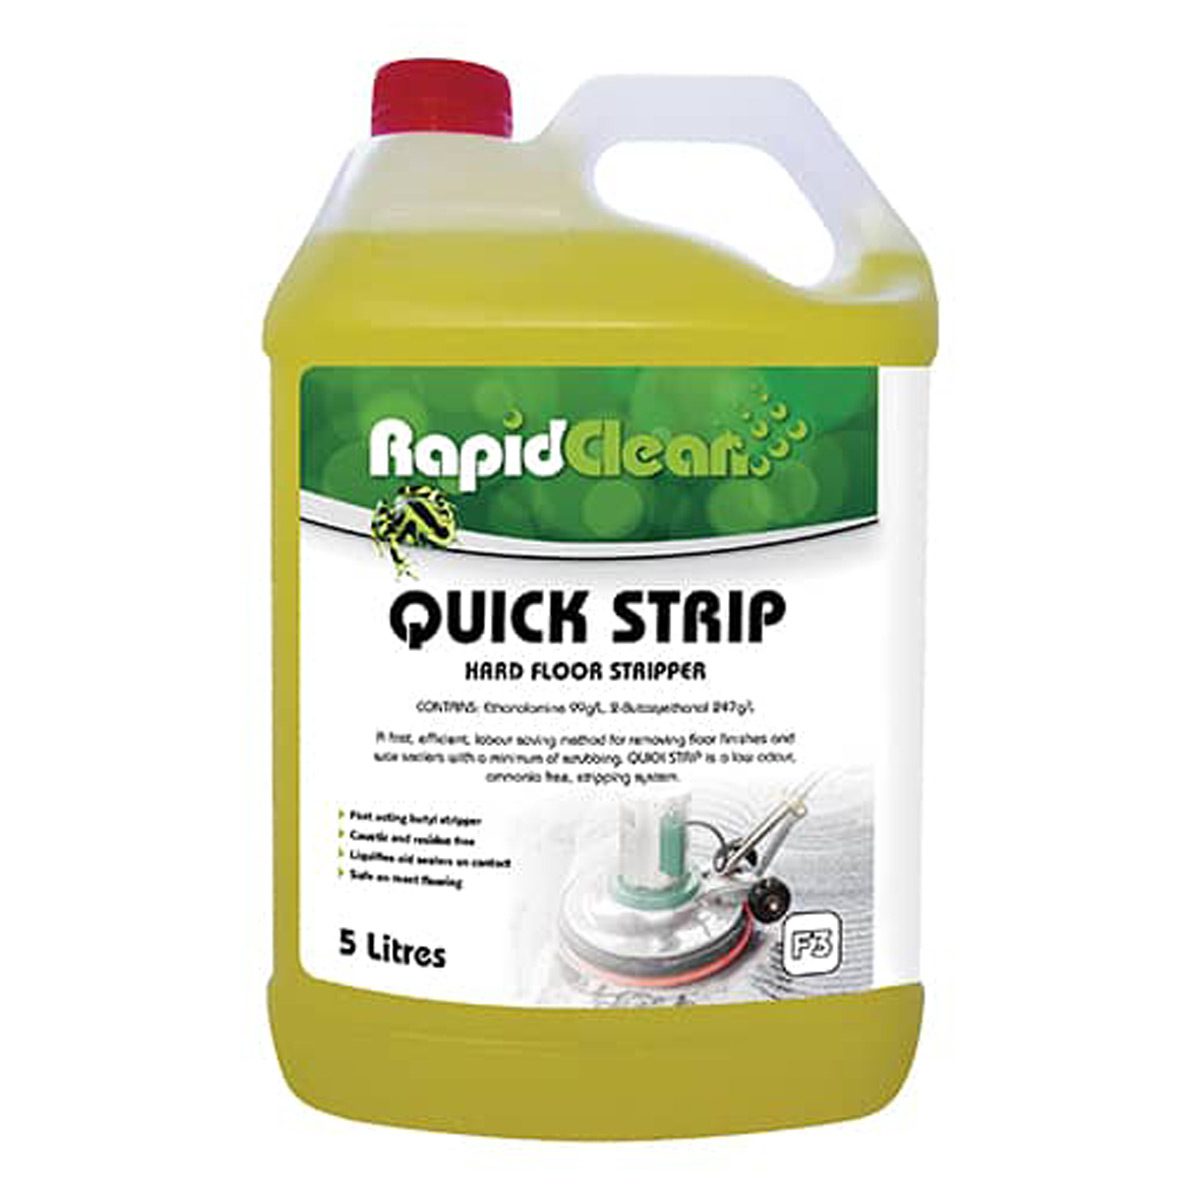 cleaning-products-floorcare-rapidclean-quick-strip-floor-stripper-5L-litre-fast-efficient-labour-saving-method-removing-floor-finishes-wax-sealers-with-minimum-scrubbing-vjs-distributors-U-141020